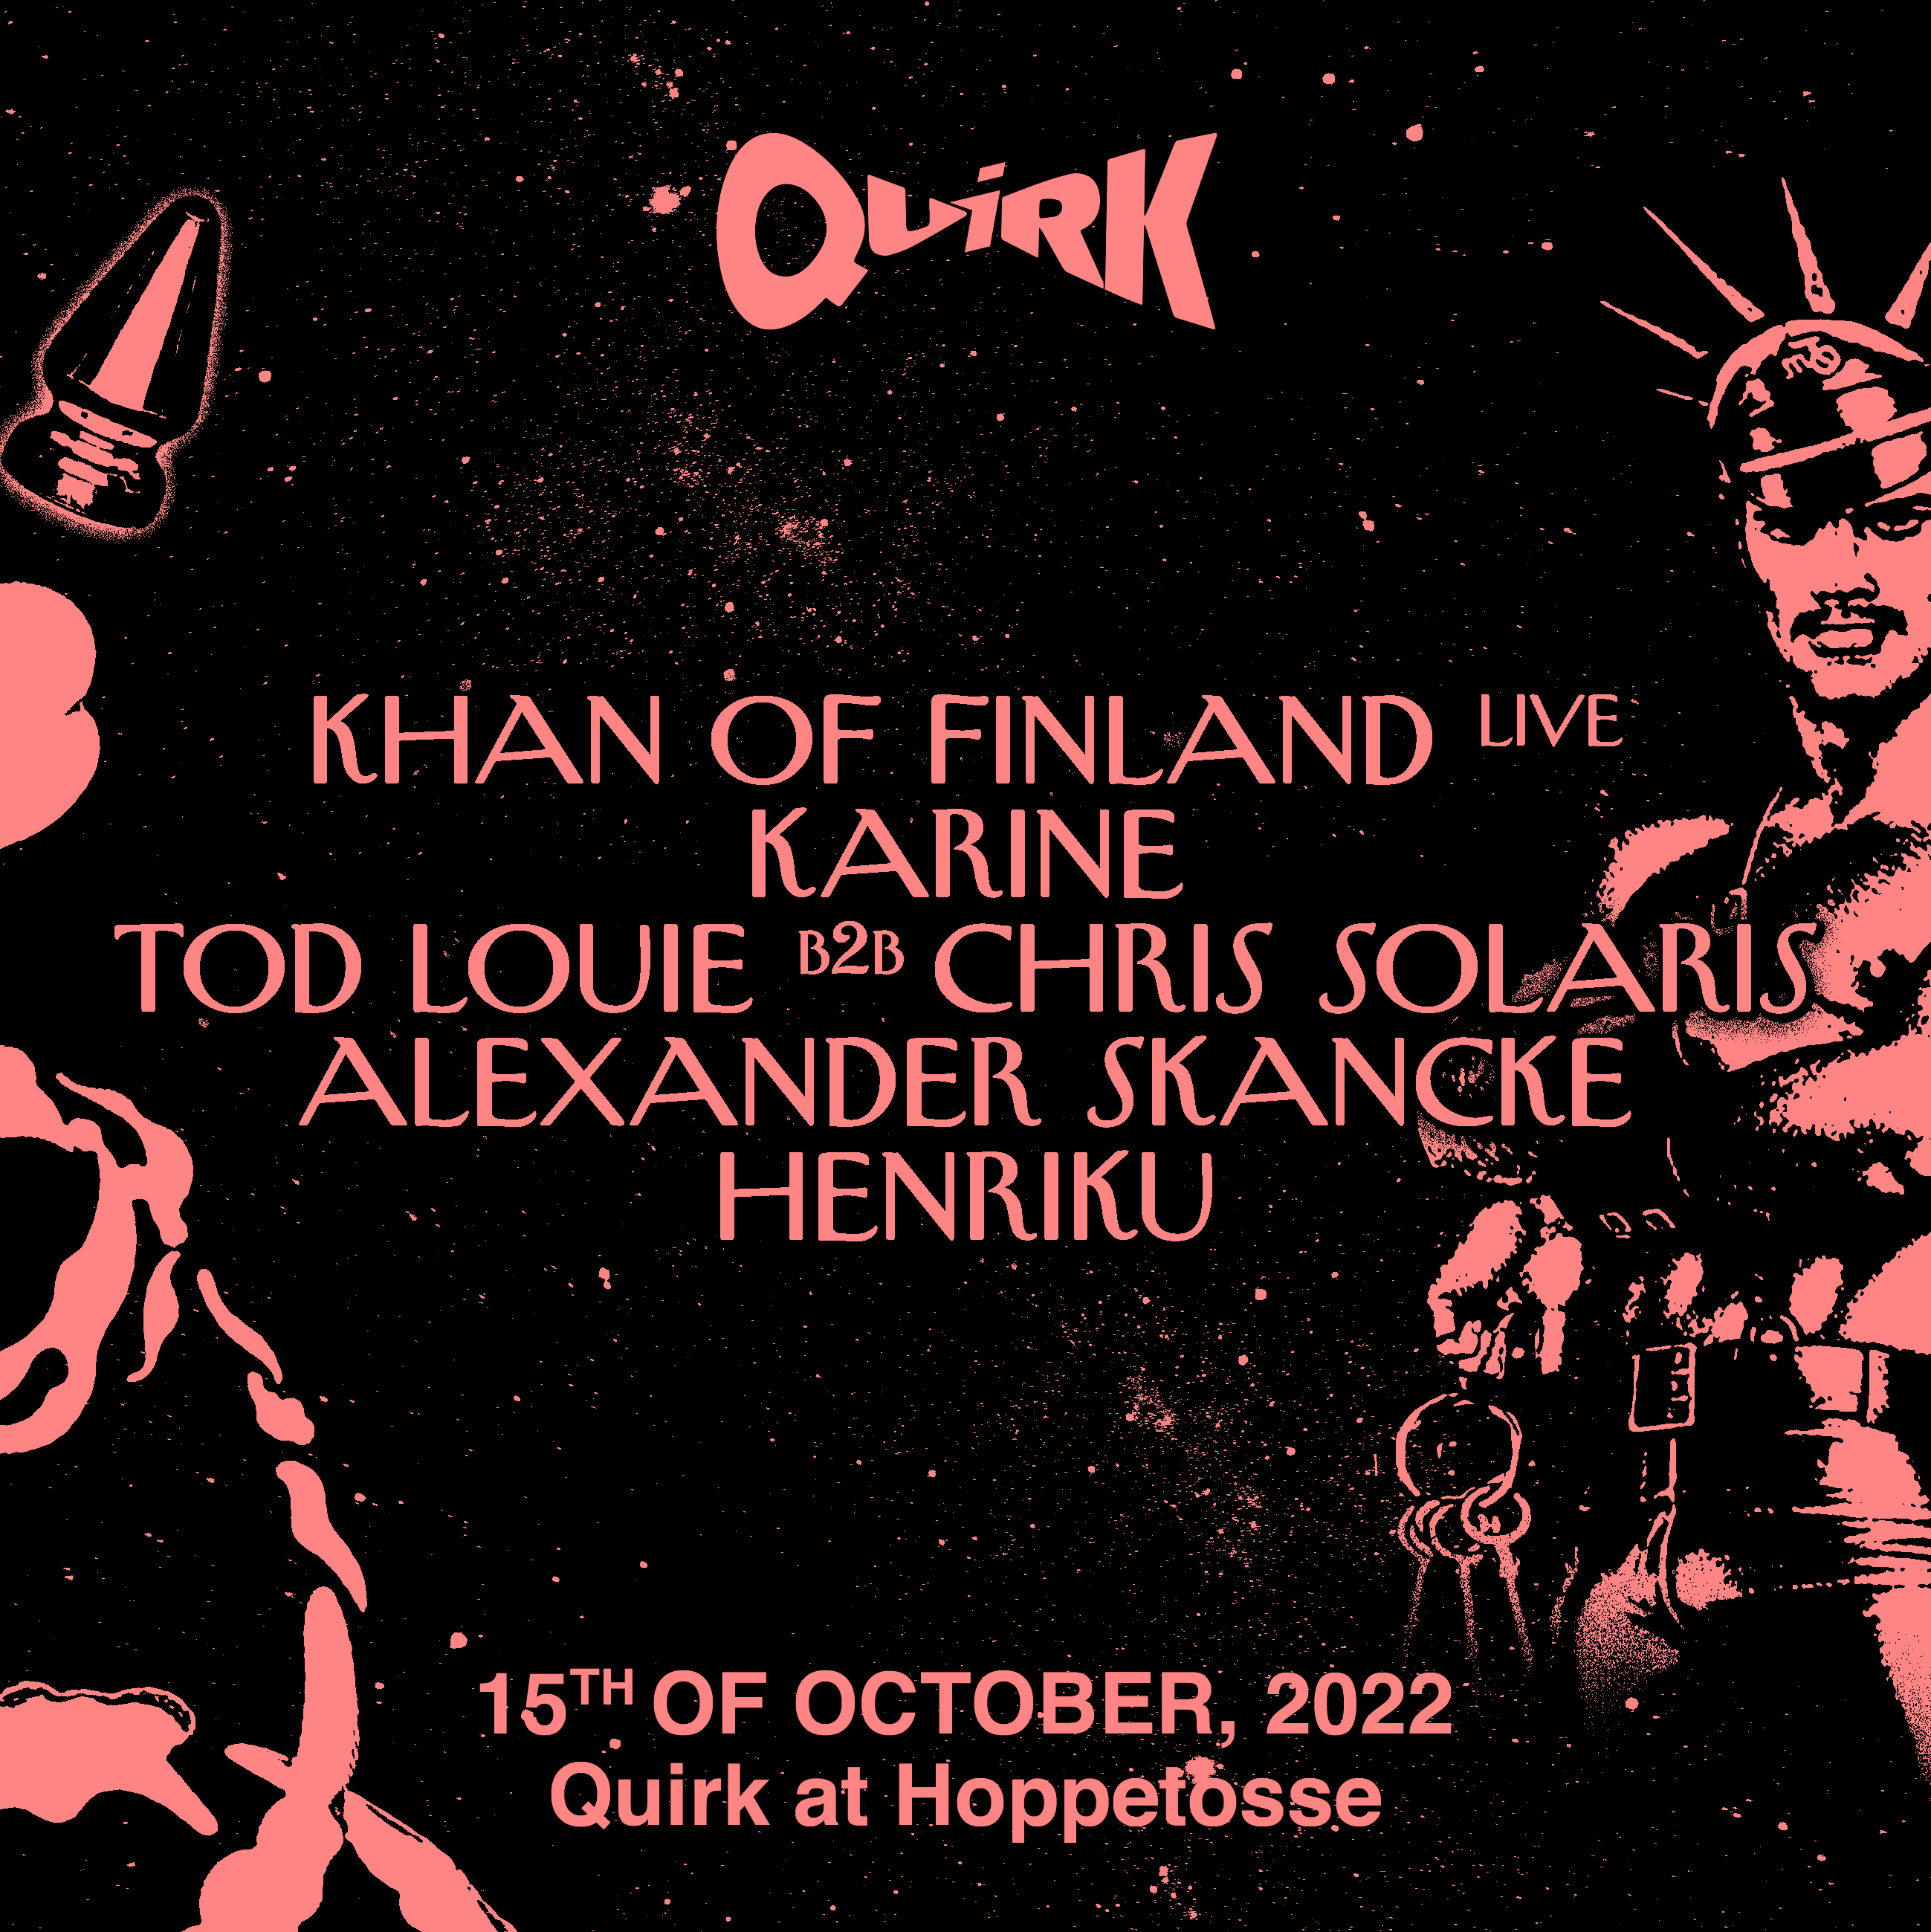 Quirk - Flyer front